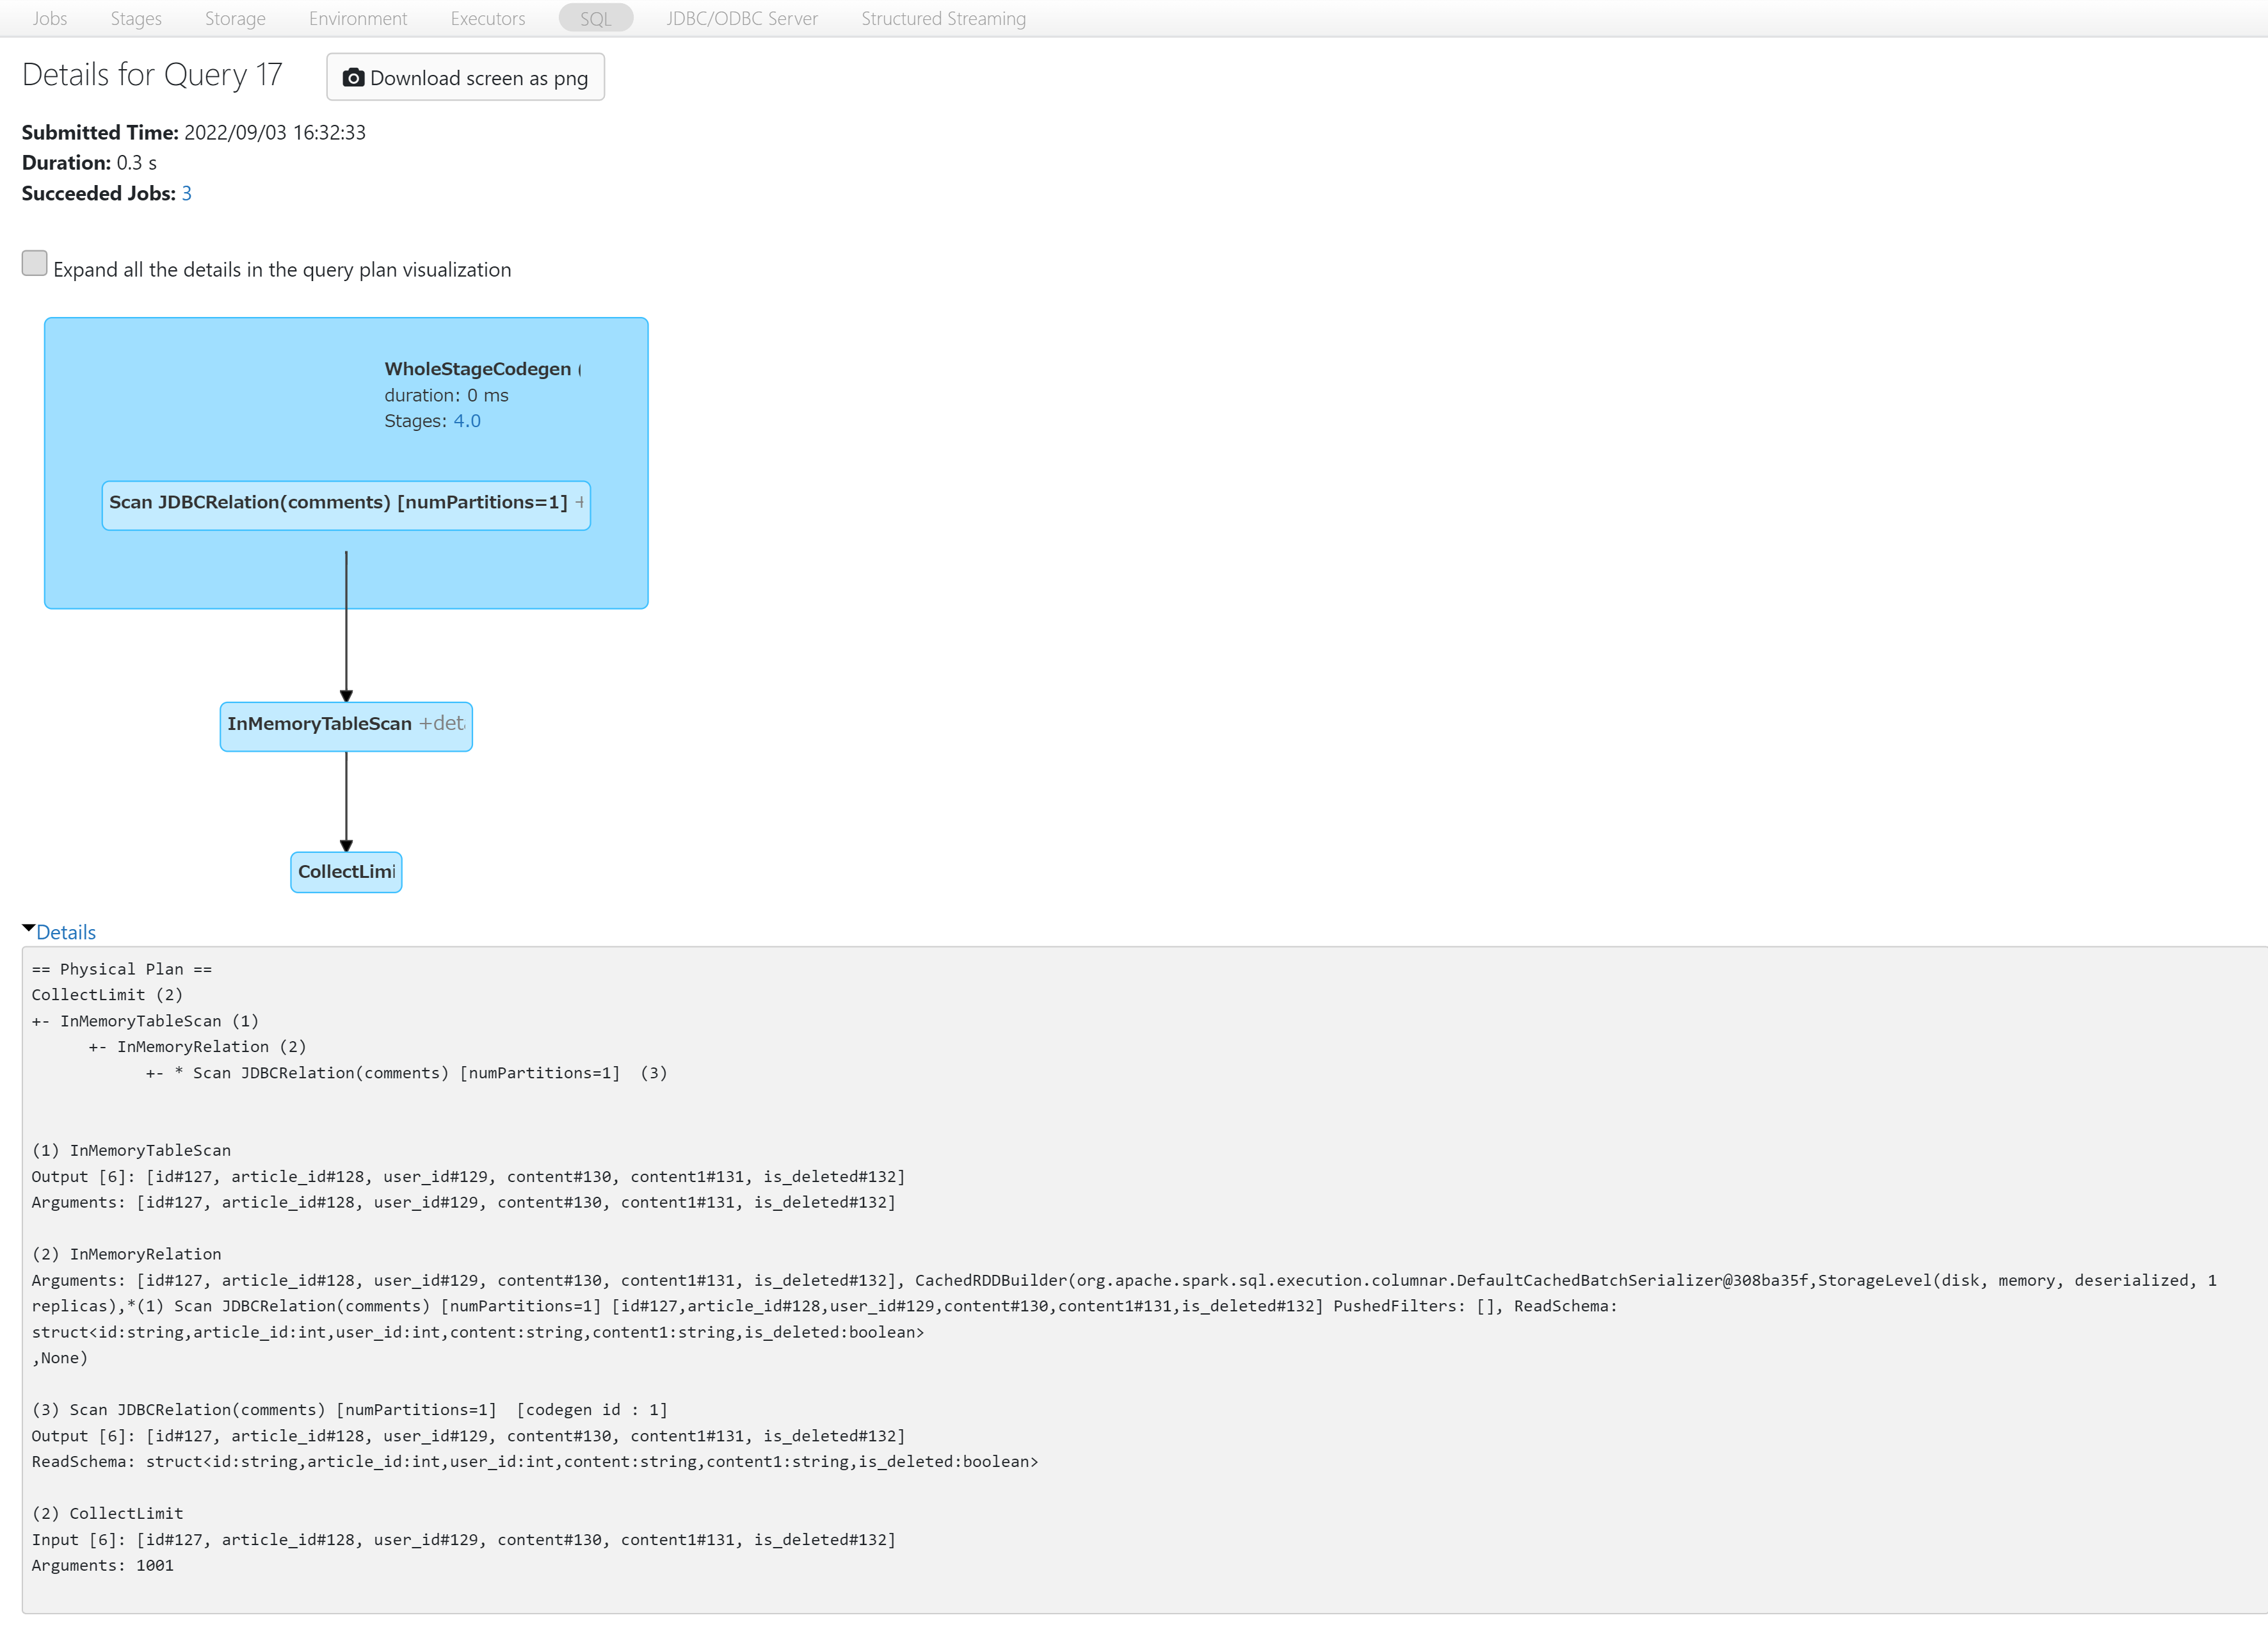 Databricks_Shell_-_Details_for_Query_17.png